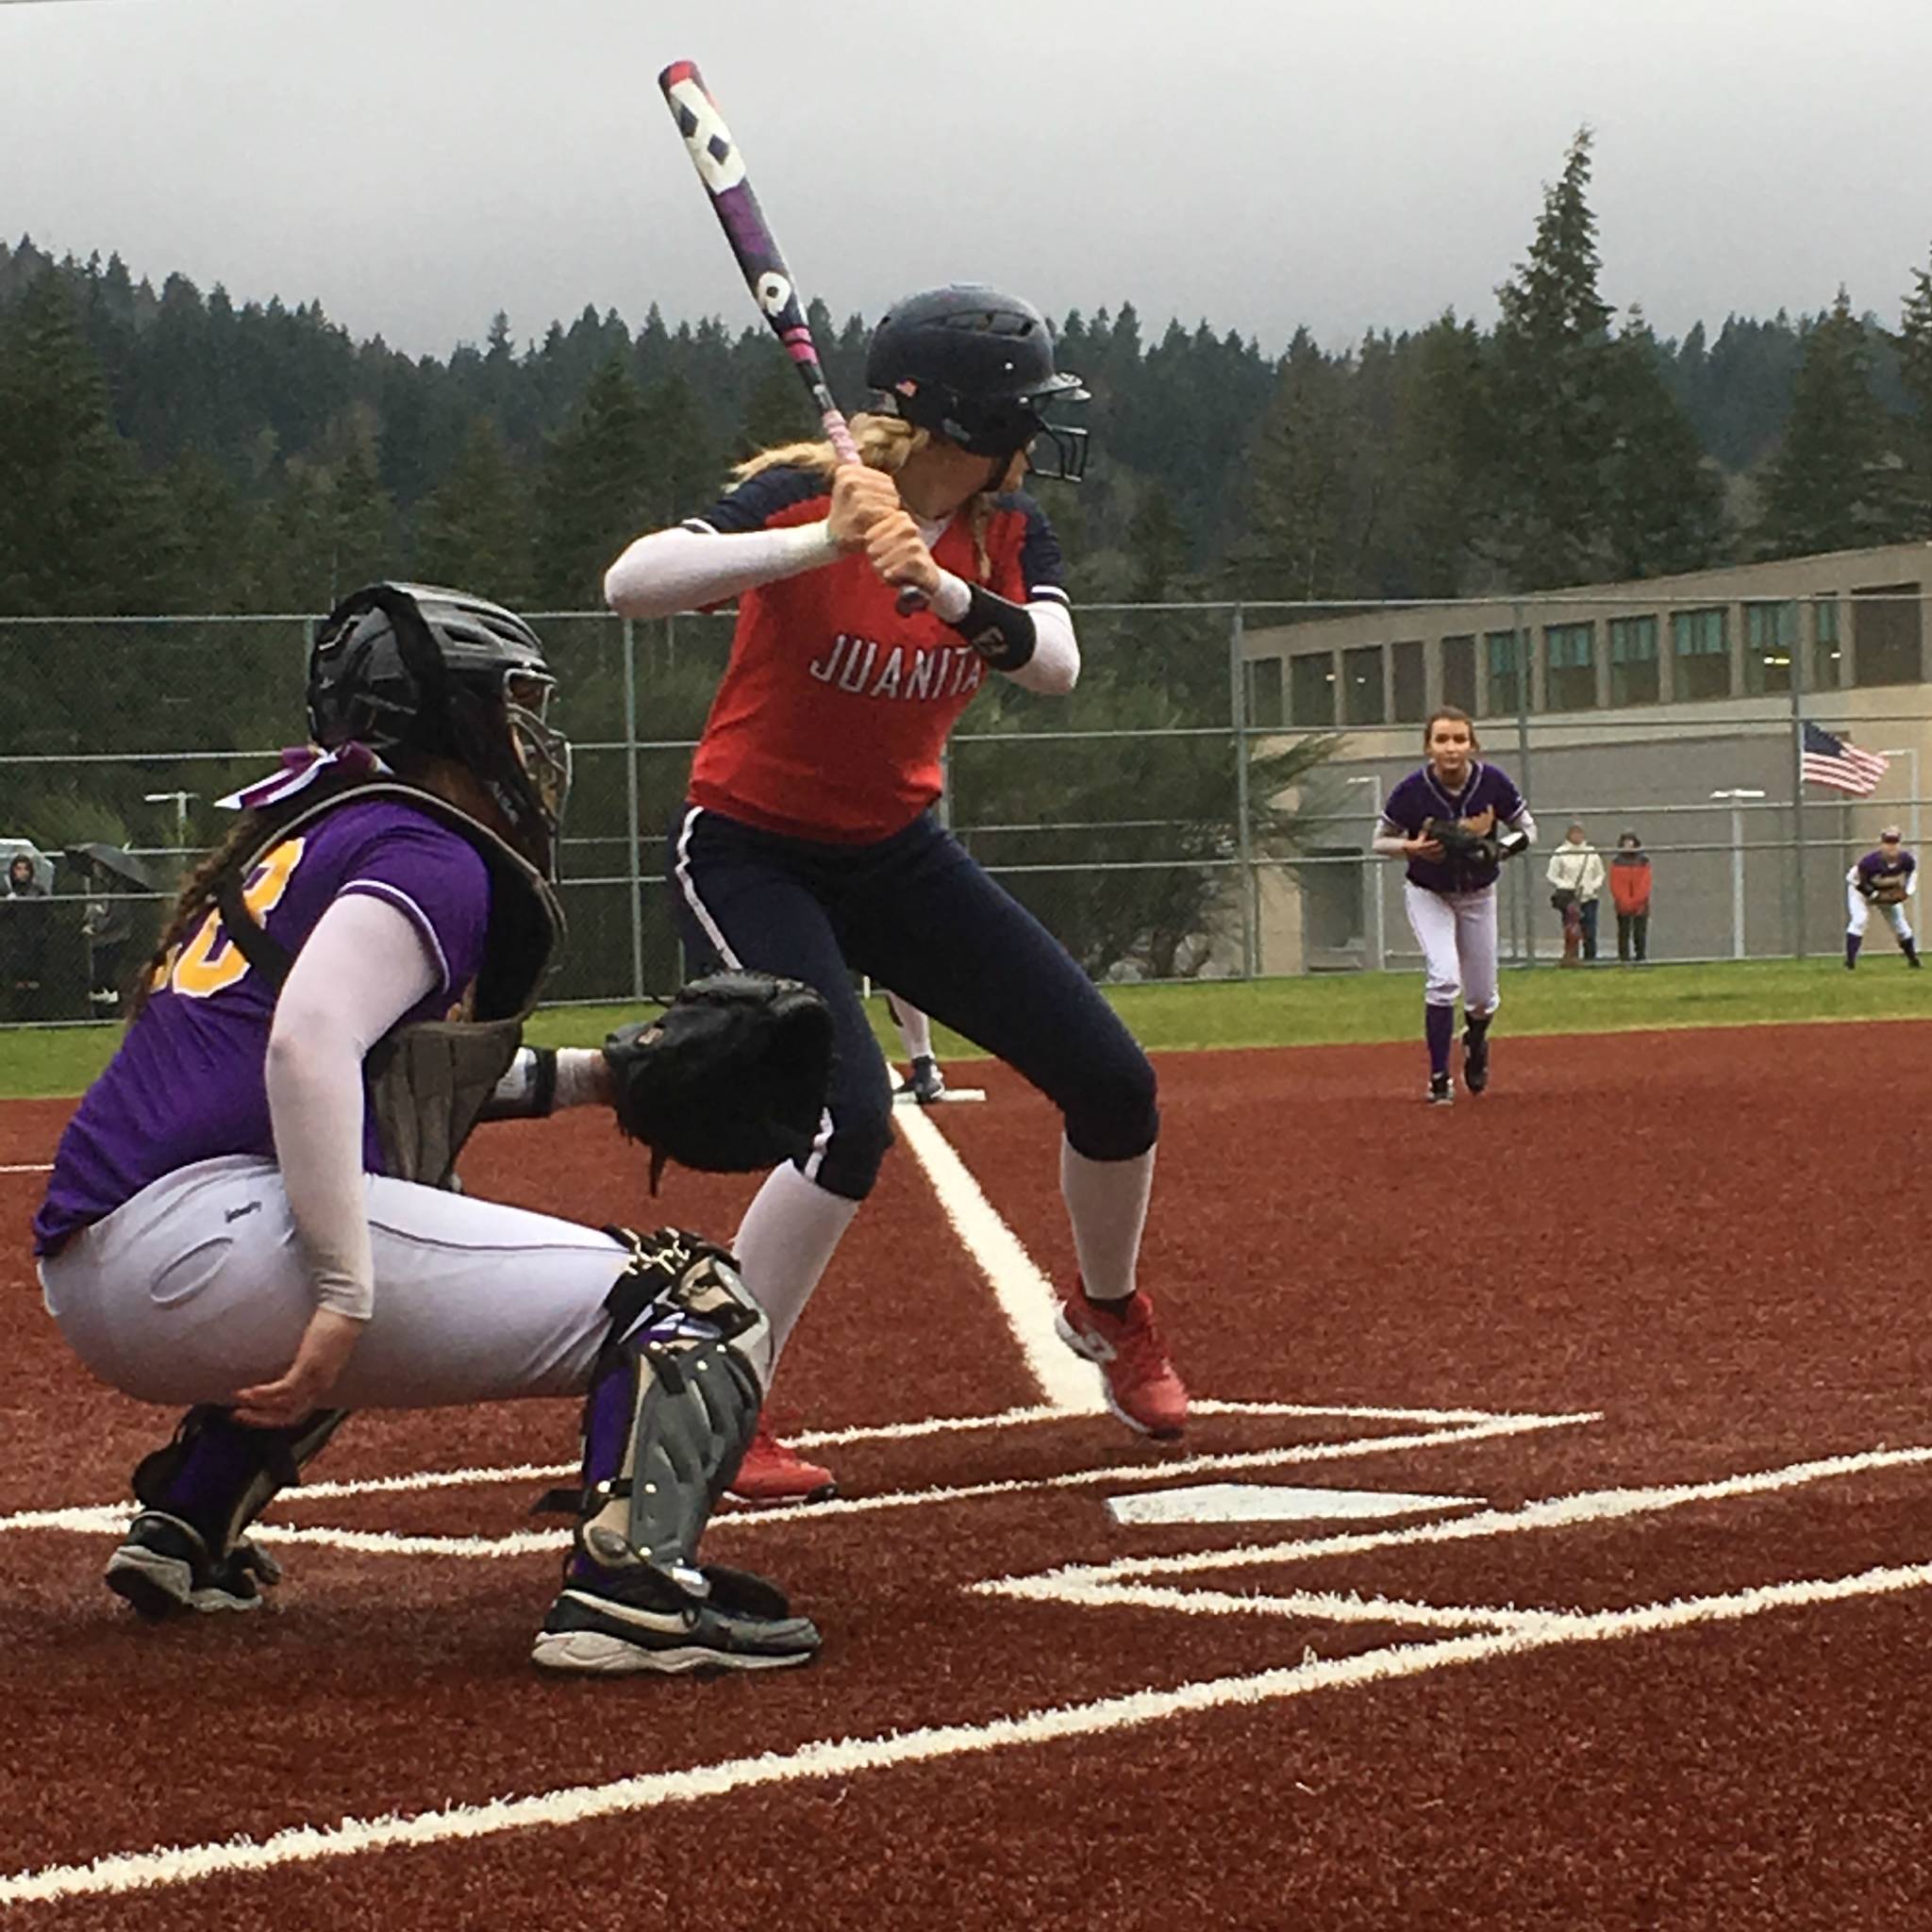 Juanita’s Kristina Warford at bat in a recent game. Courtesy of Shannon Longcore